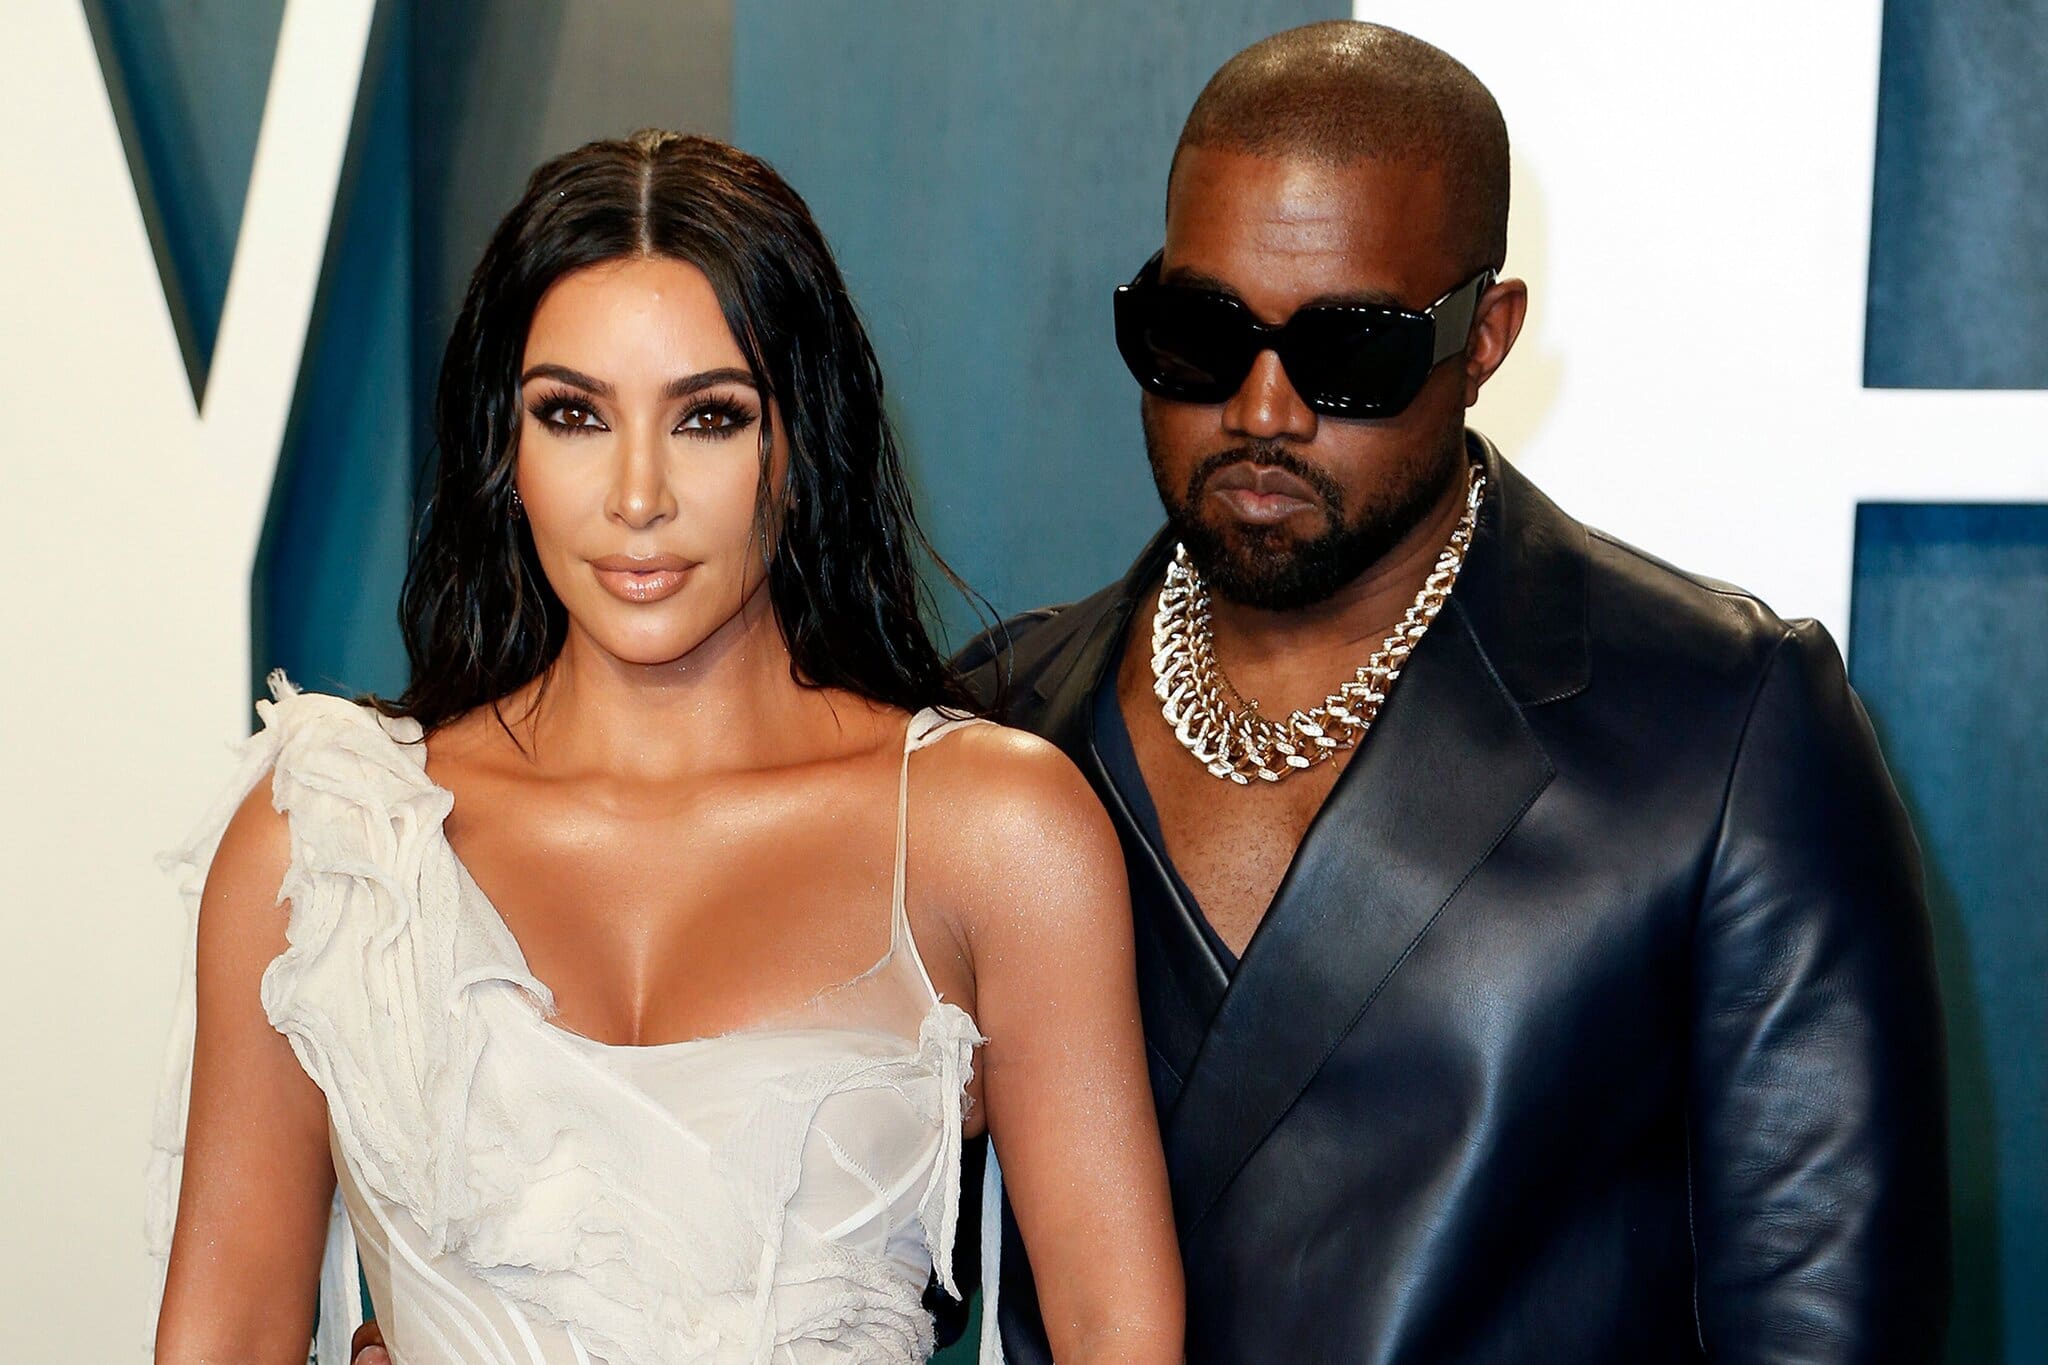 ”kim-kardashian-praises-kanye-west-and-what-he-was-willing-to-do-for-her”